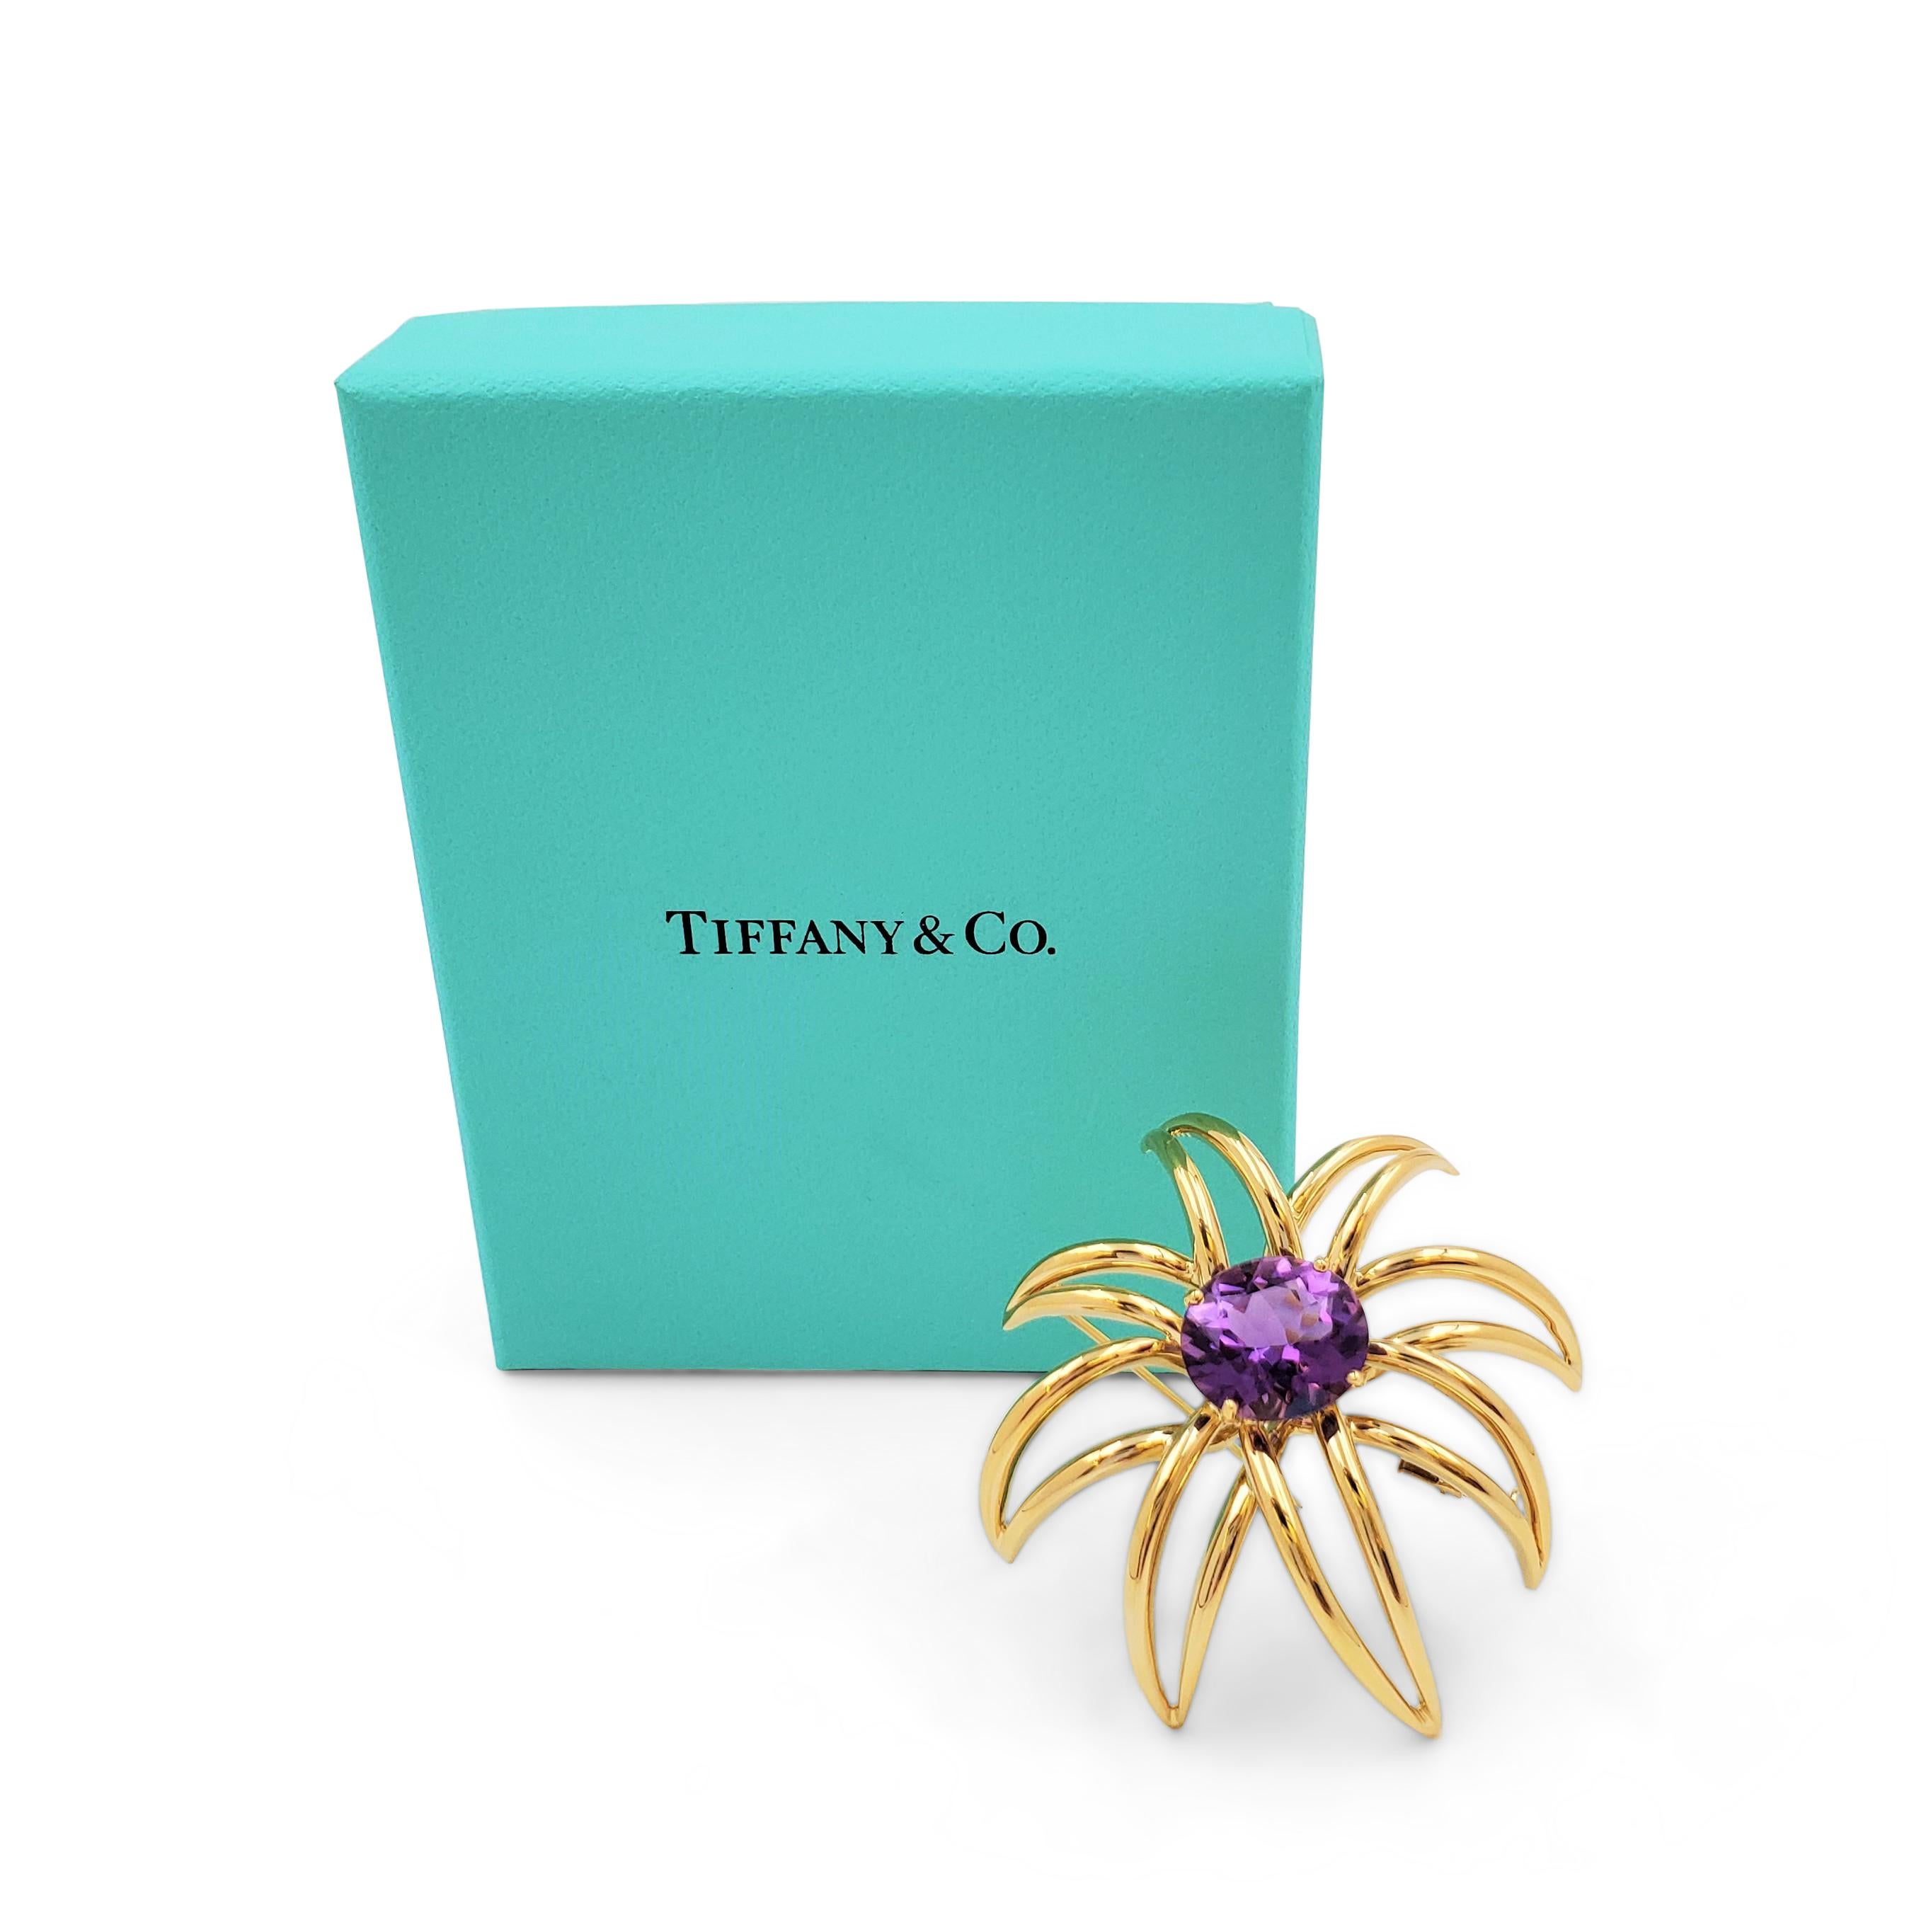 Oval Cut Tiffany & Co. 'Fireworks' Yellow Gold and Amethyst Brooch